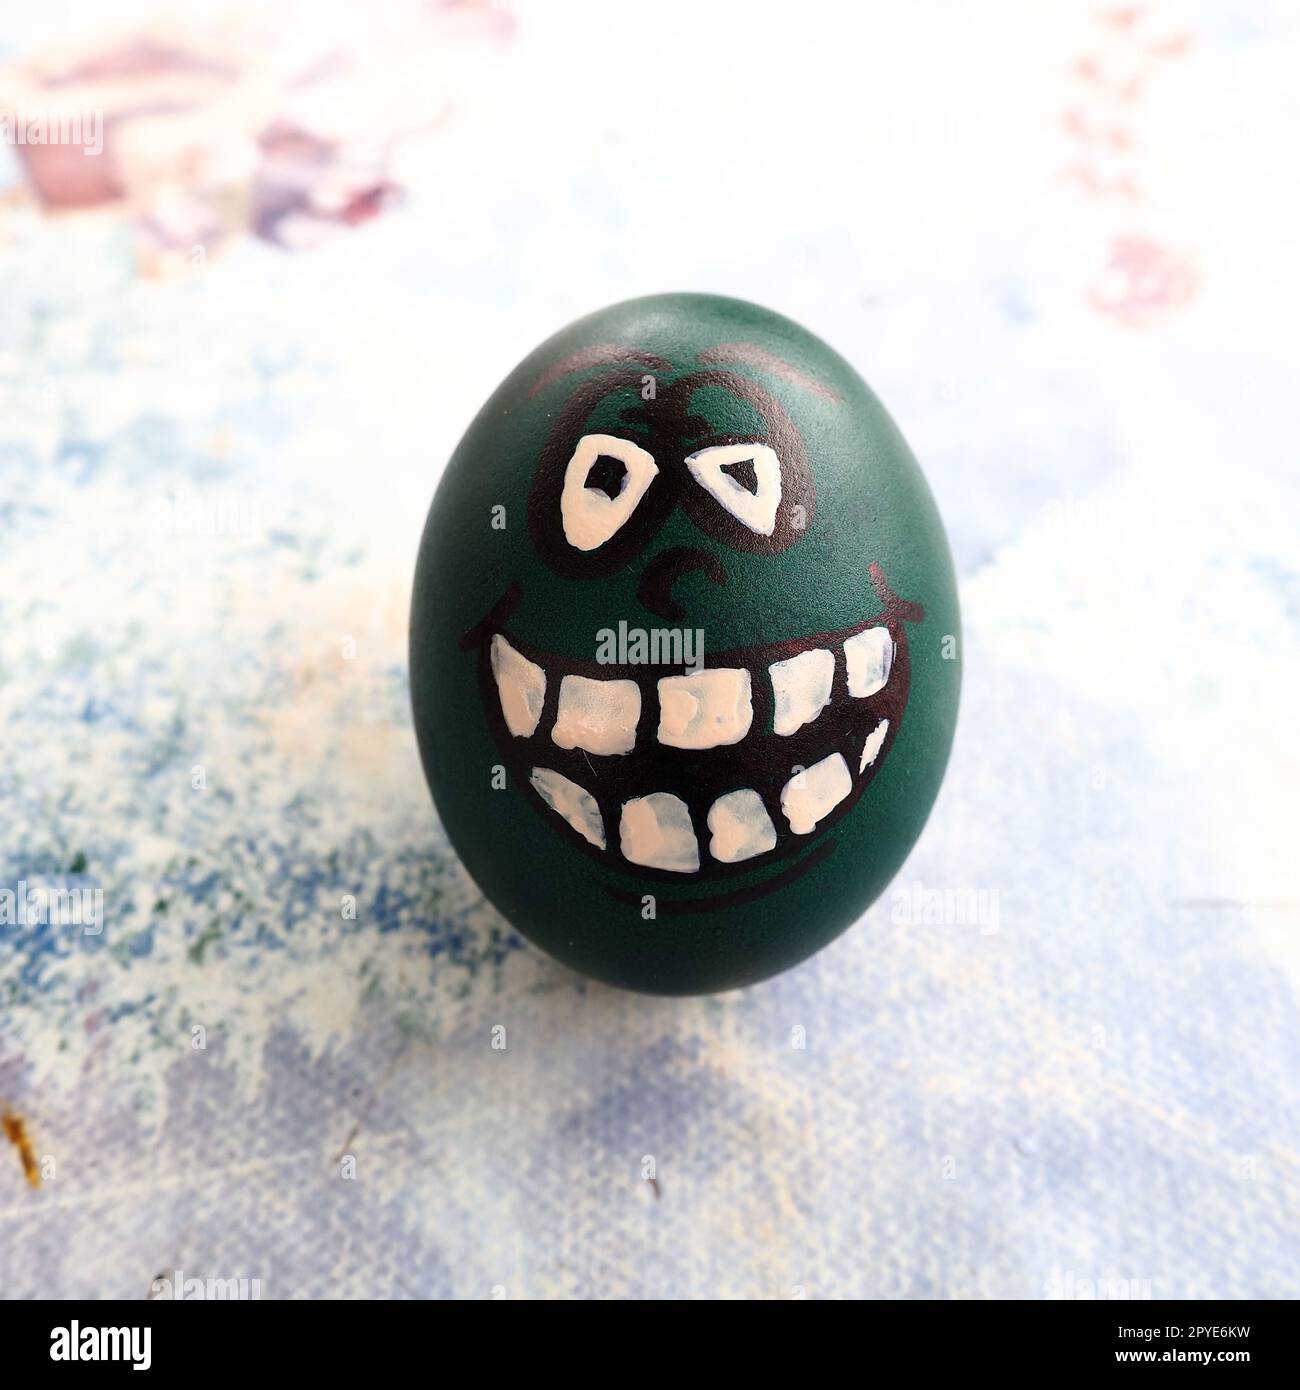 Easter egg dyed green with a painted laughing face. Cool grimace with eyes and big white teeth. Scary mug for Halloween. Emoticon for Easter. Light abstract background. Stock Photo